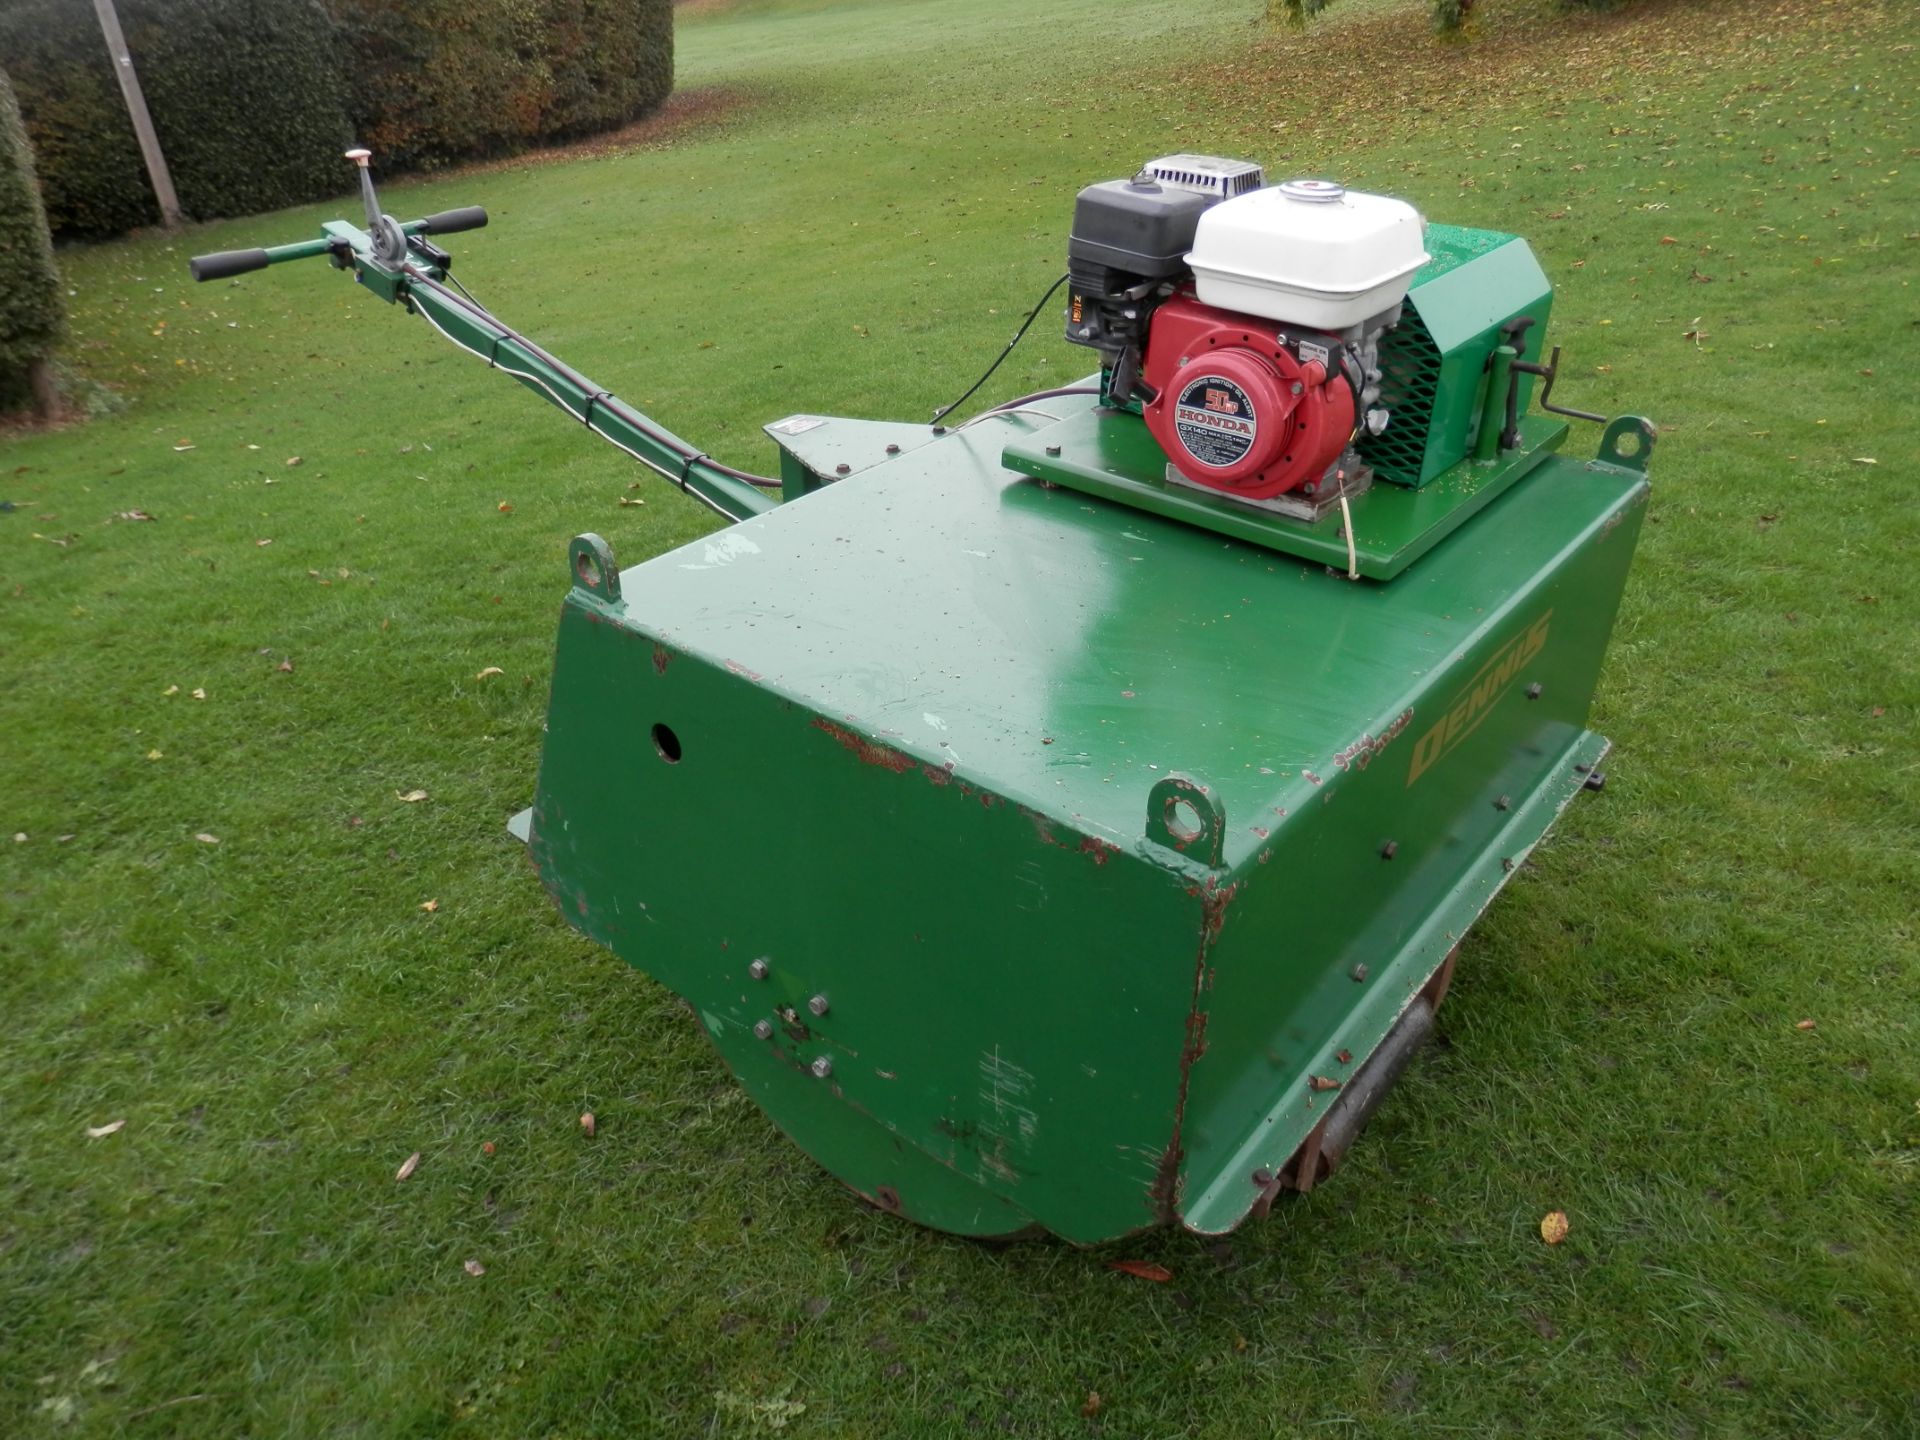 LARGE 1990S DENNIS LAWN ROLLER WITH HONDA 5 HP PETROL ENGINE.